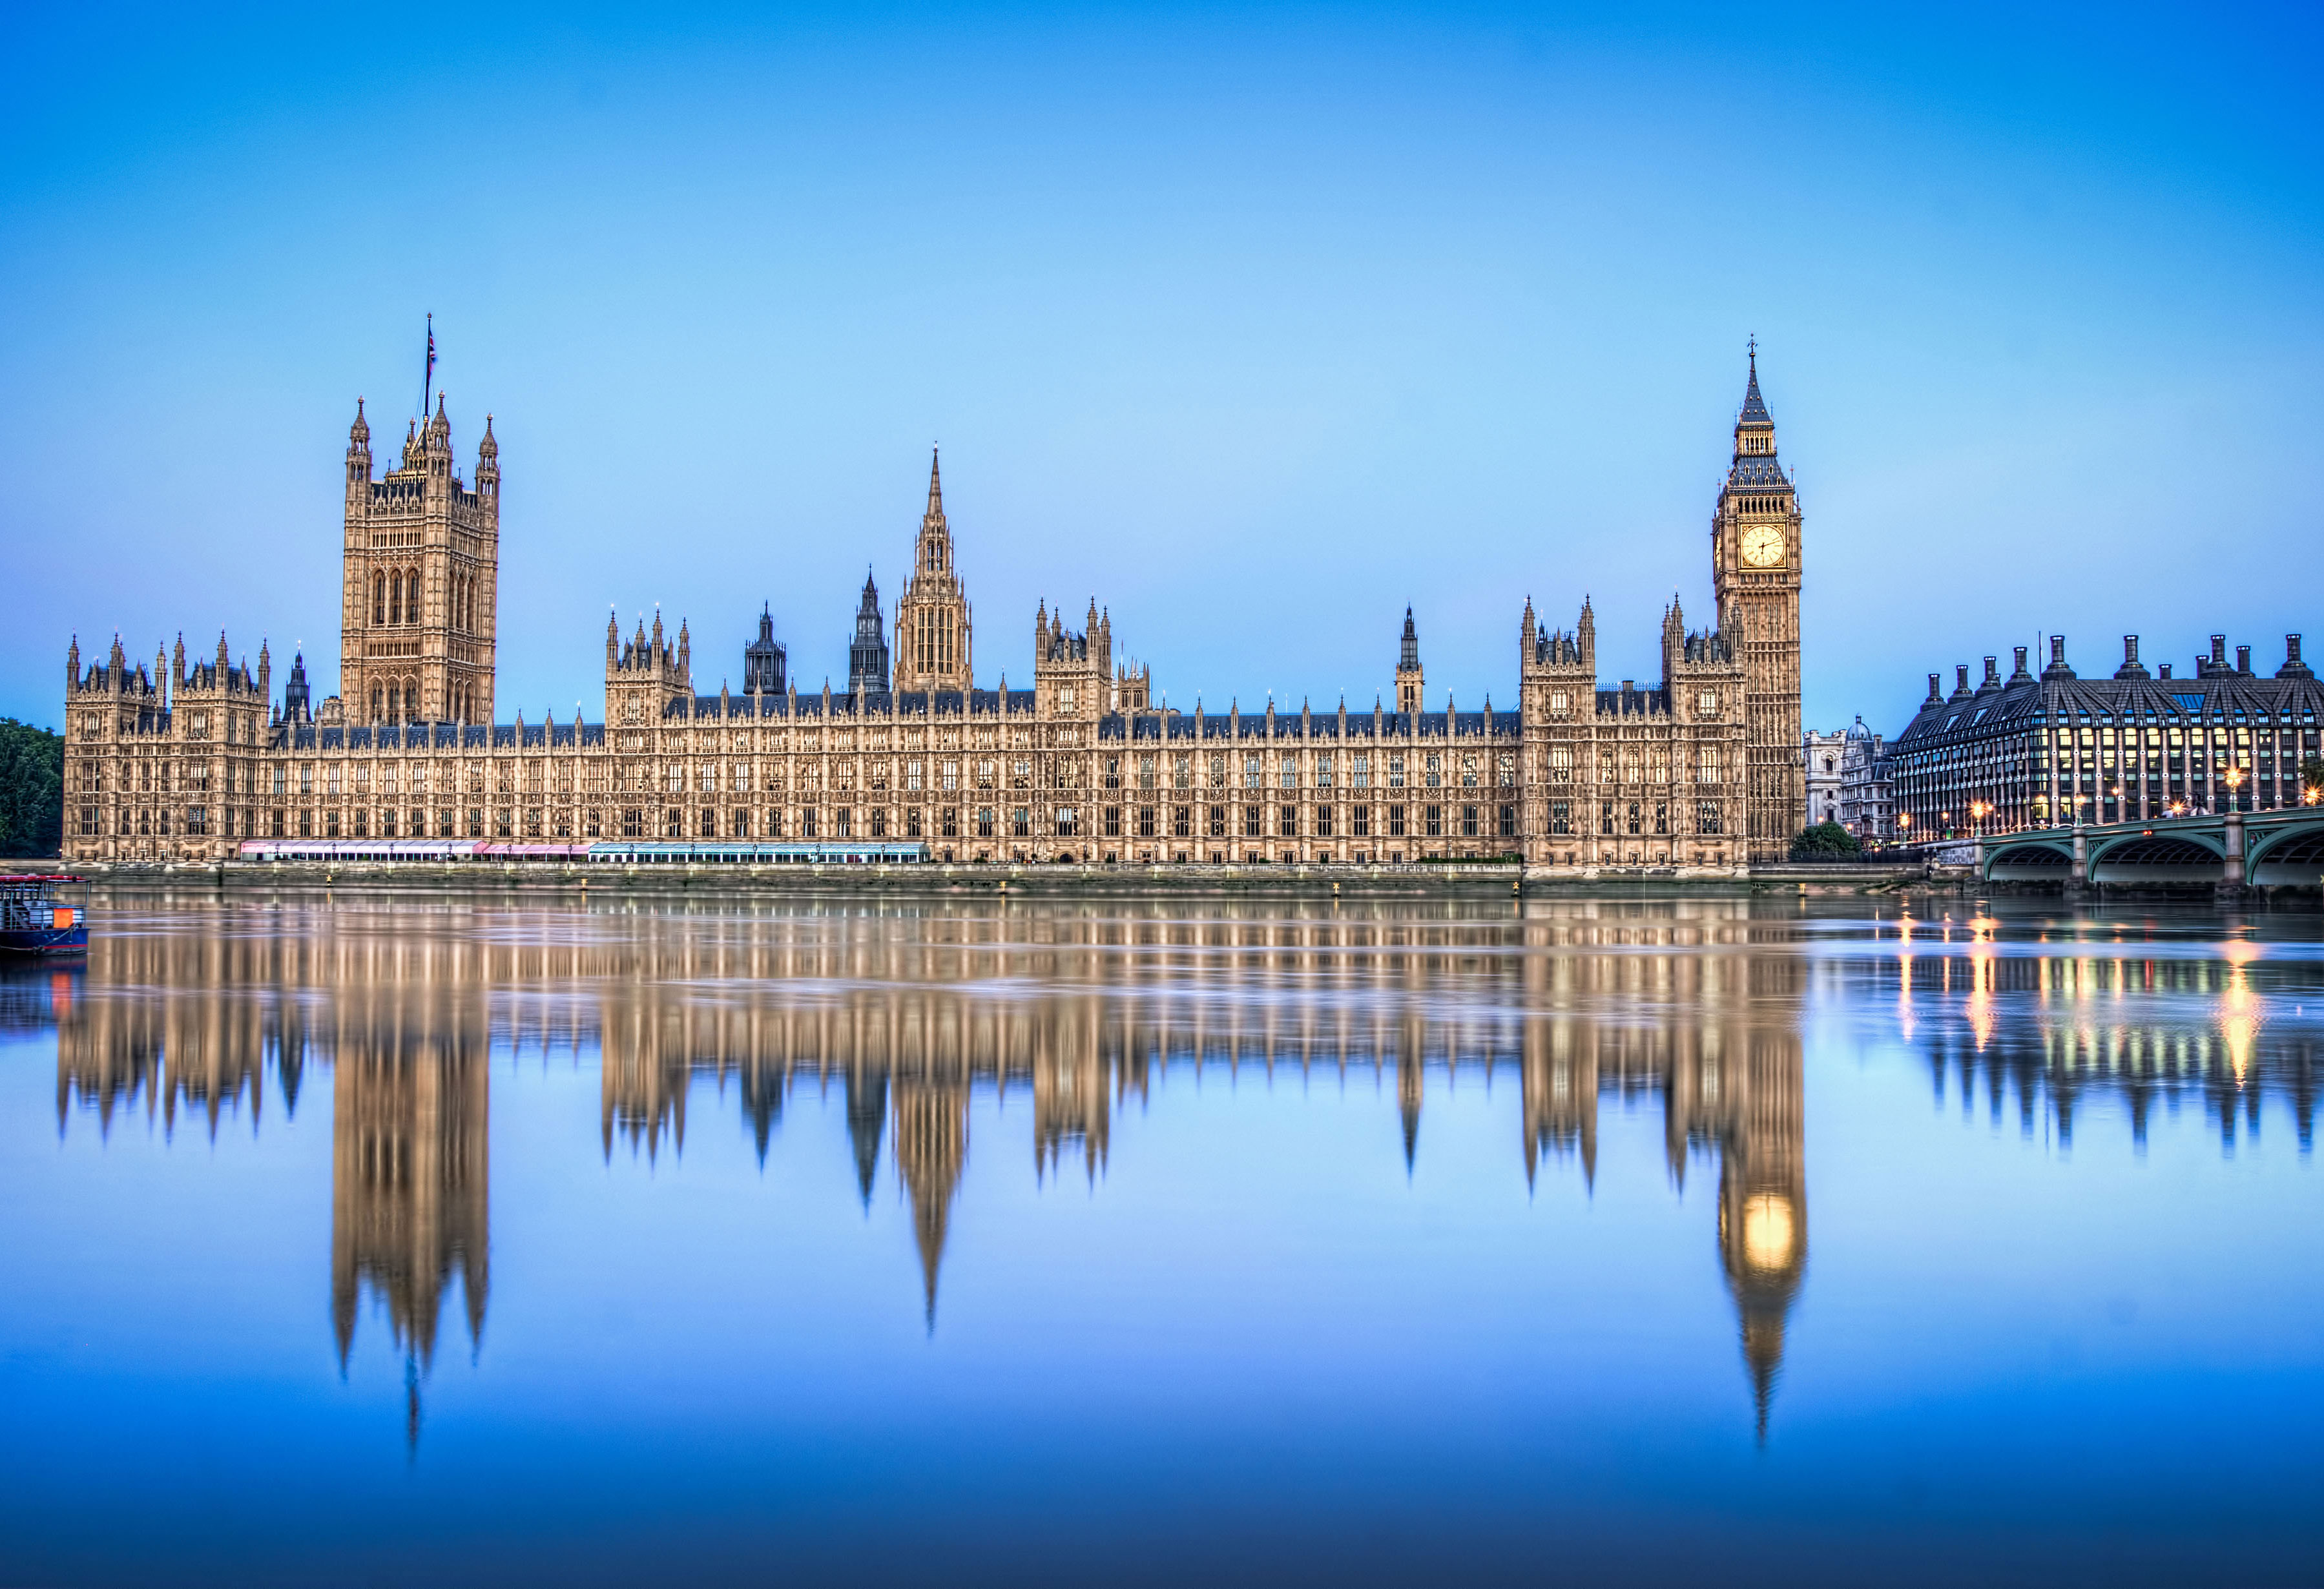 Palace of Westminster Restoration and Renewal